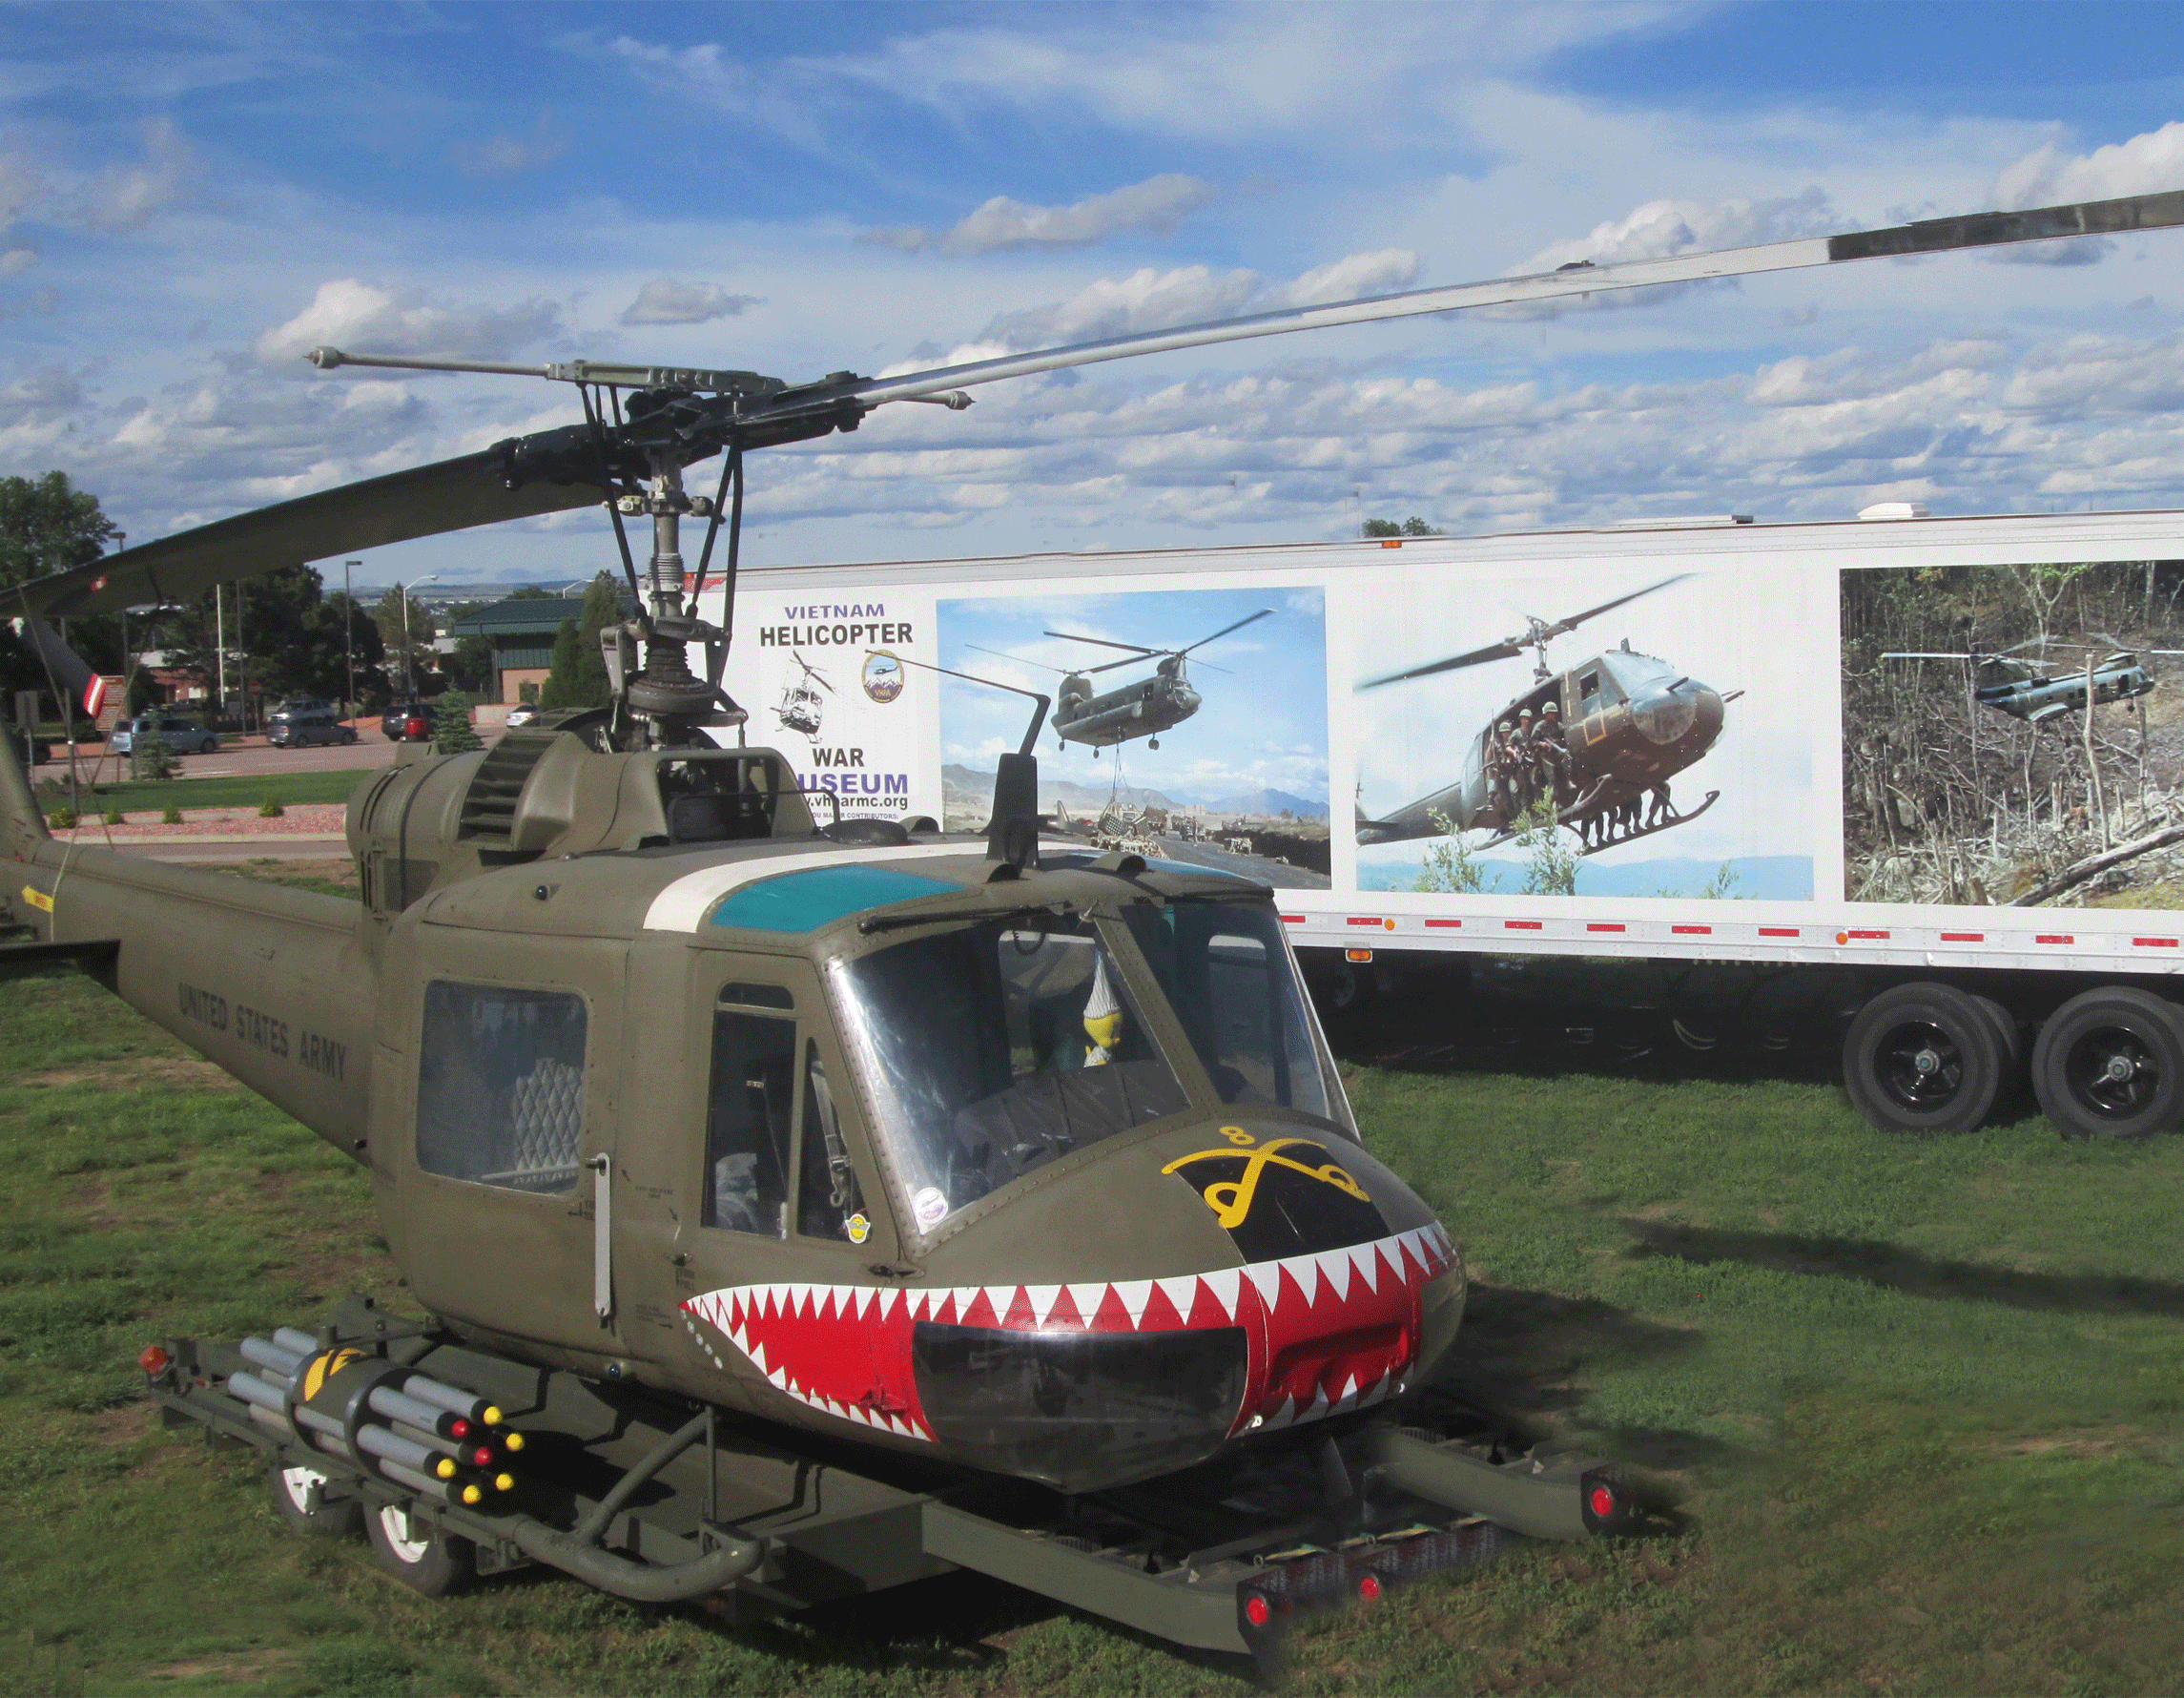 Huey helicopter sitting next to the trailer of the Vietnam Helicopter Museum Exhibit